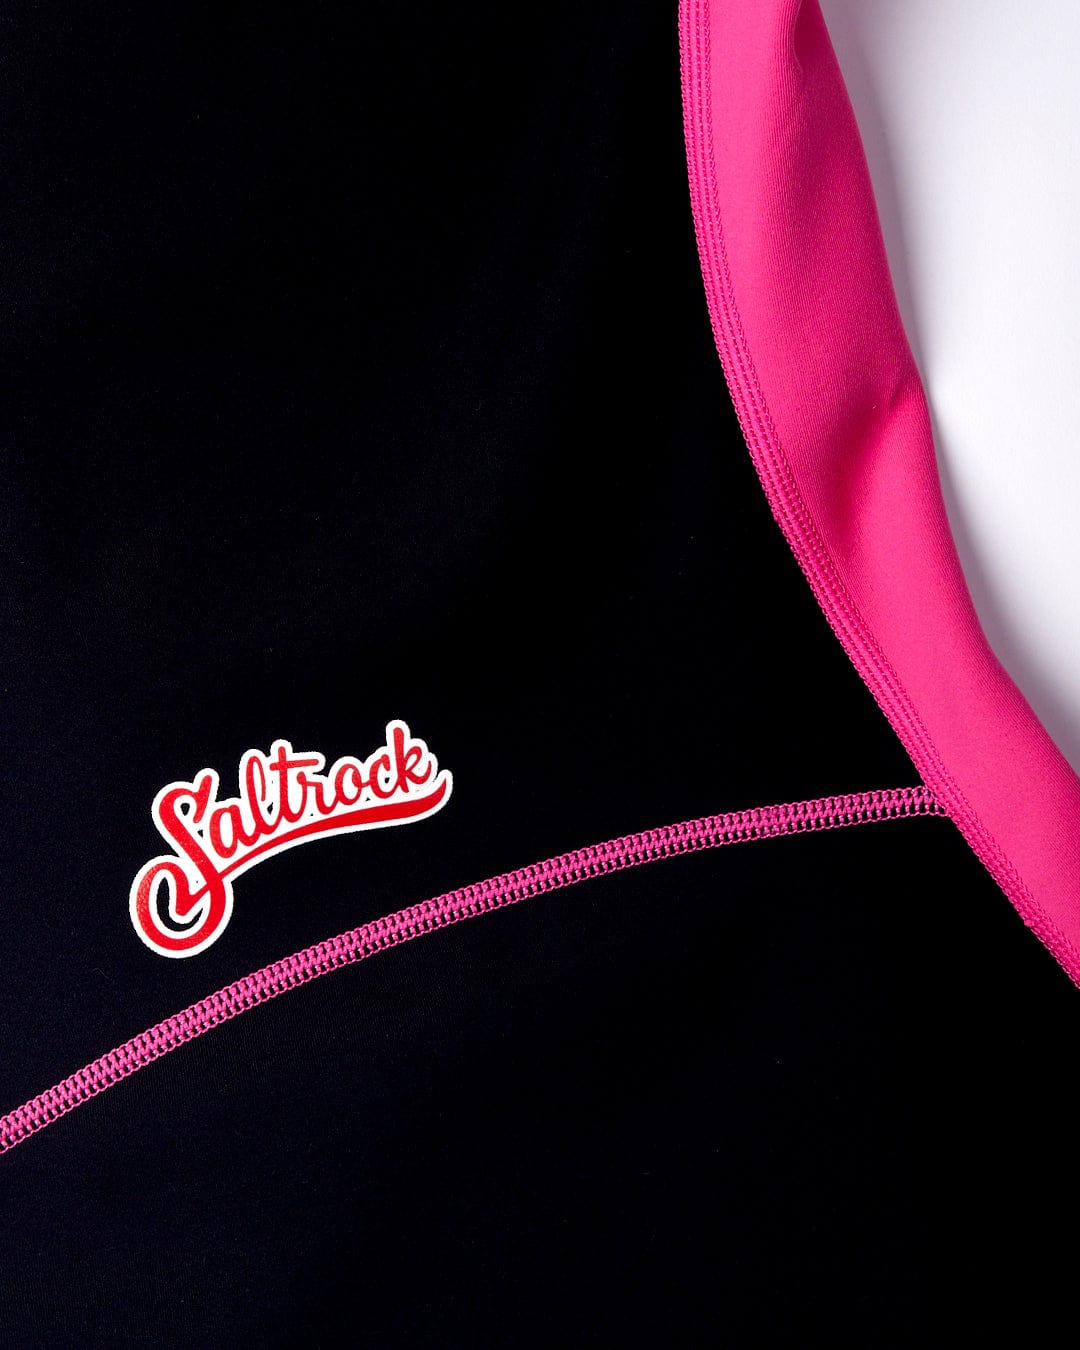 Close-up of a Saltrock logo on a black and pink neoprene wetsuit with visible seam and zipper detail featuring the Hibiscus - Womens Springsuit - Pink.